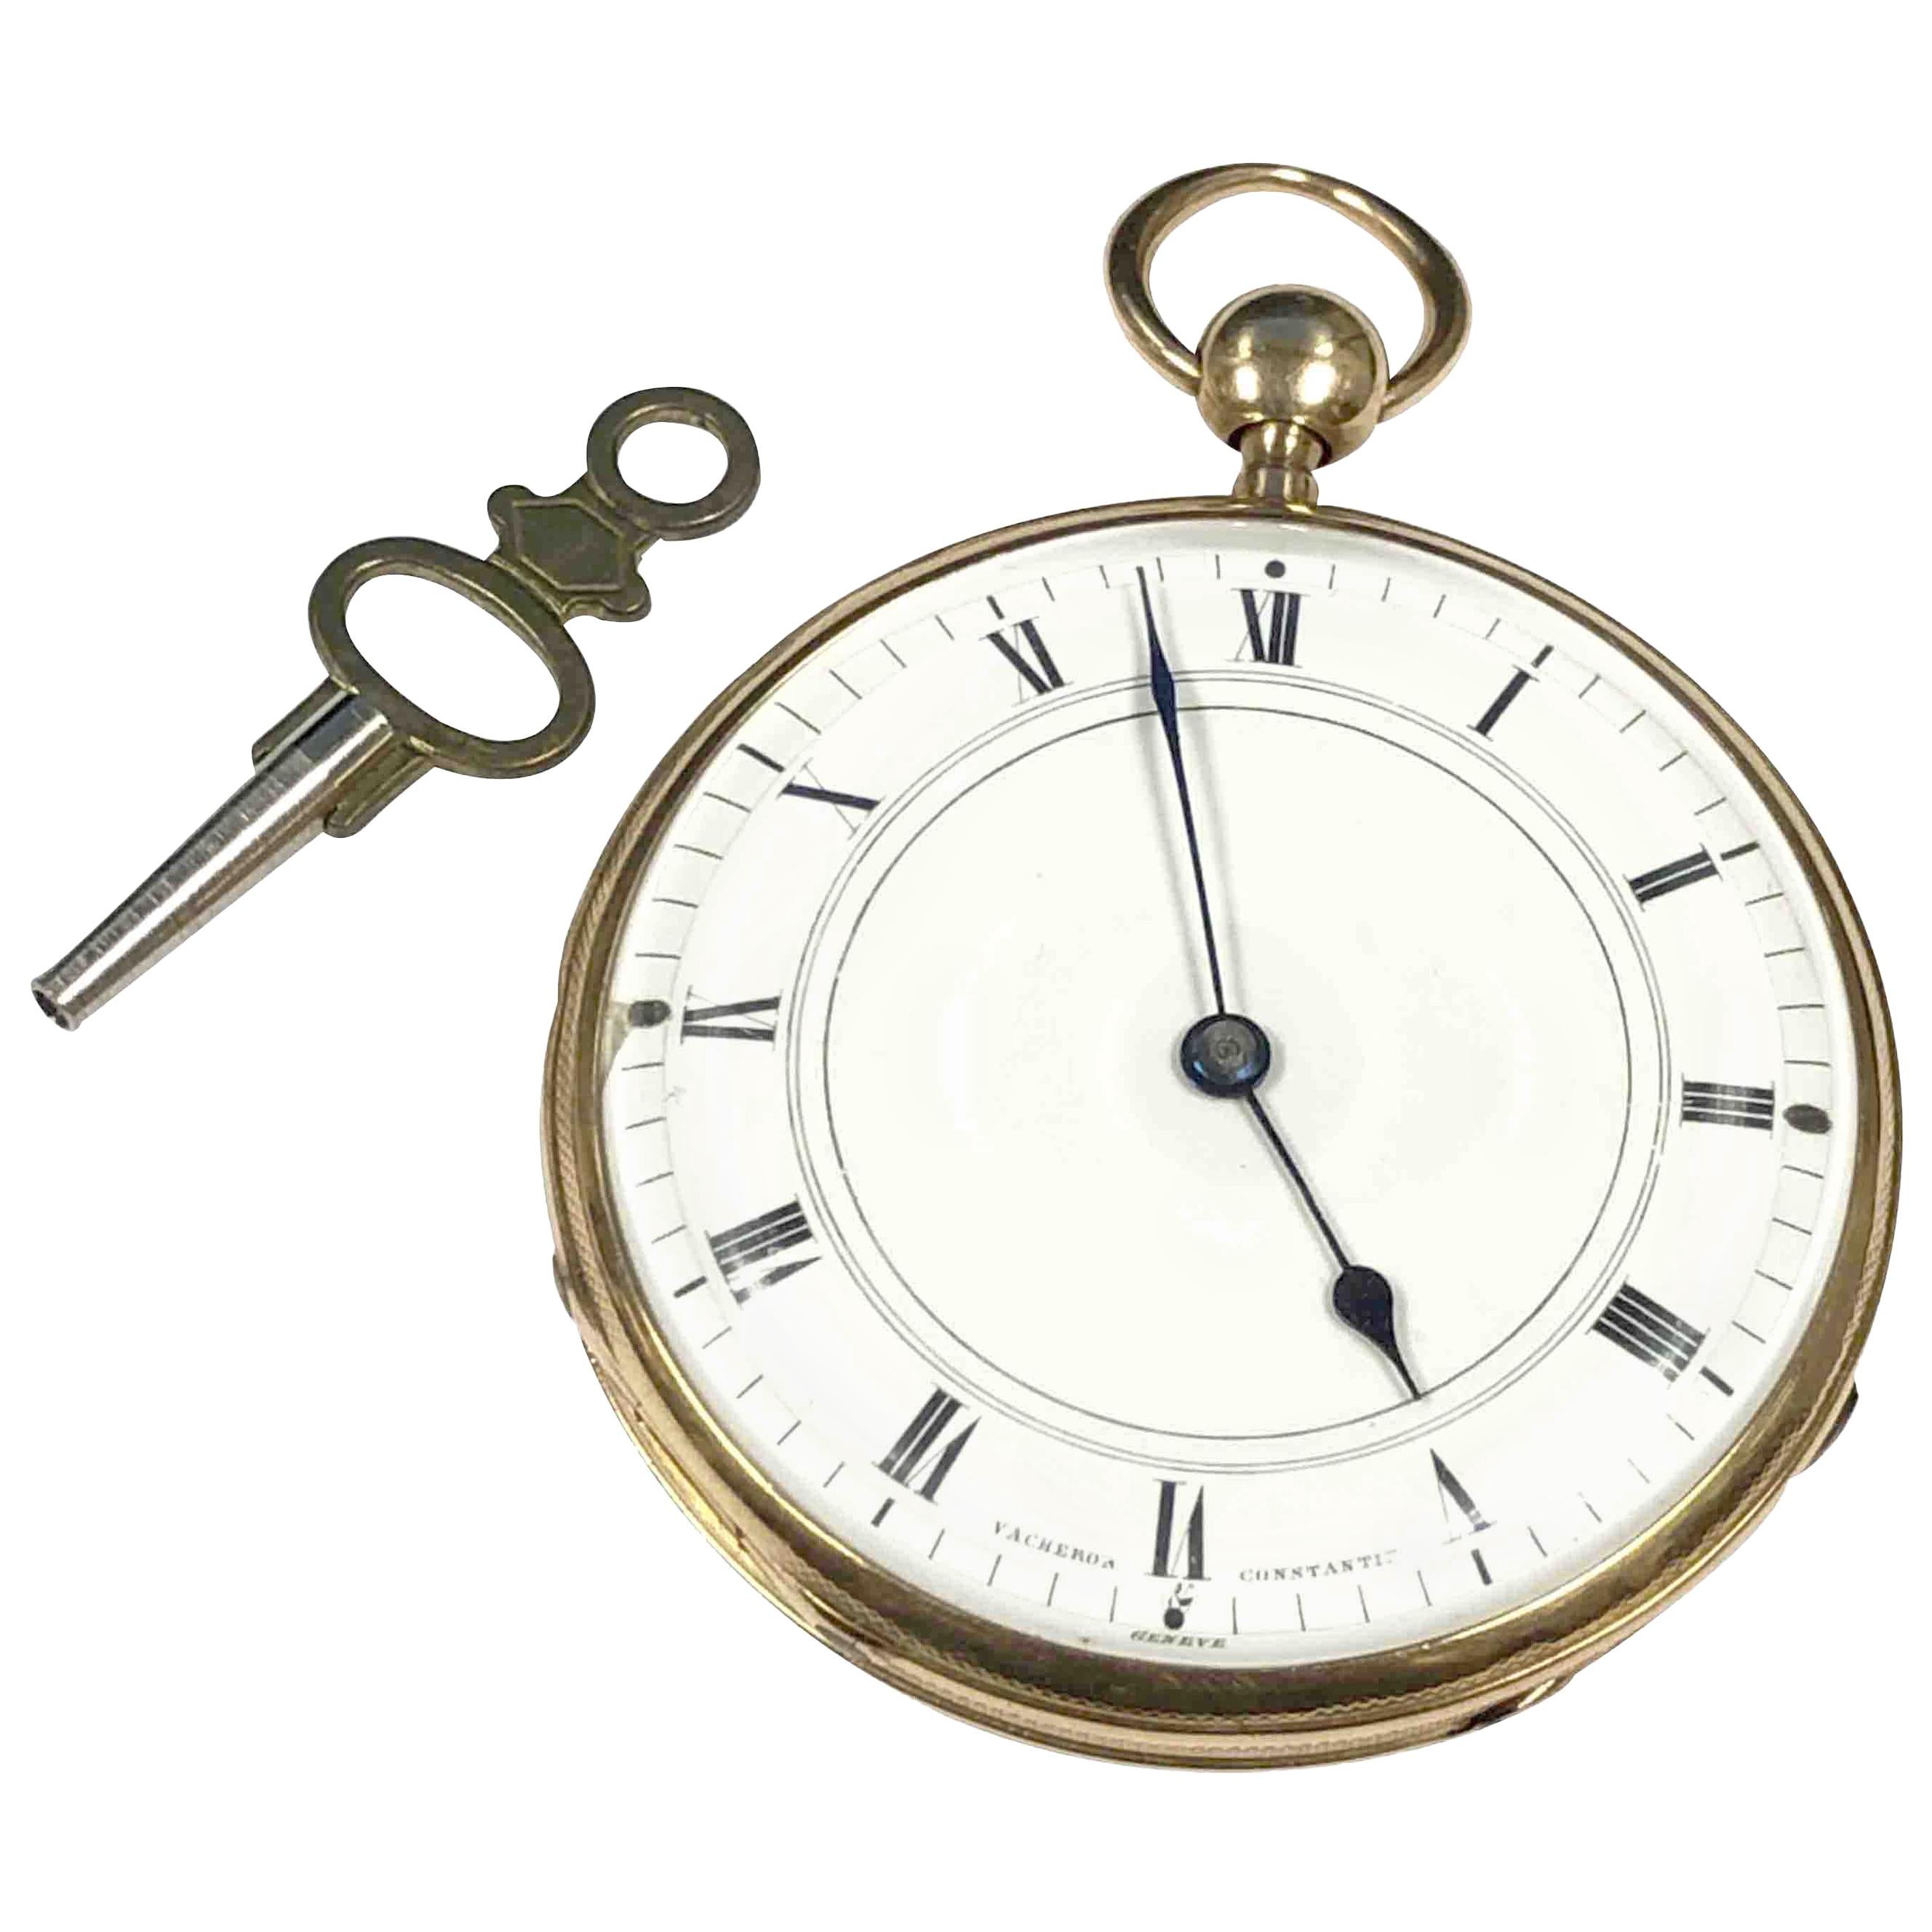 Vacheron and Constantin Gold Cased Quarter Hour Repeater Pocket Watch